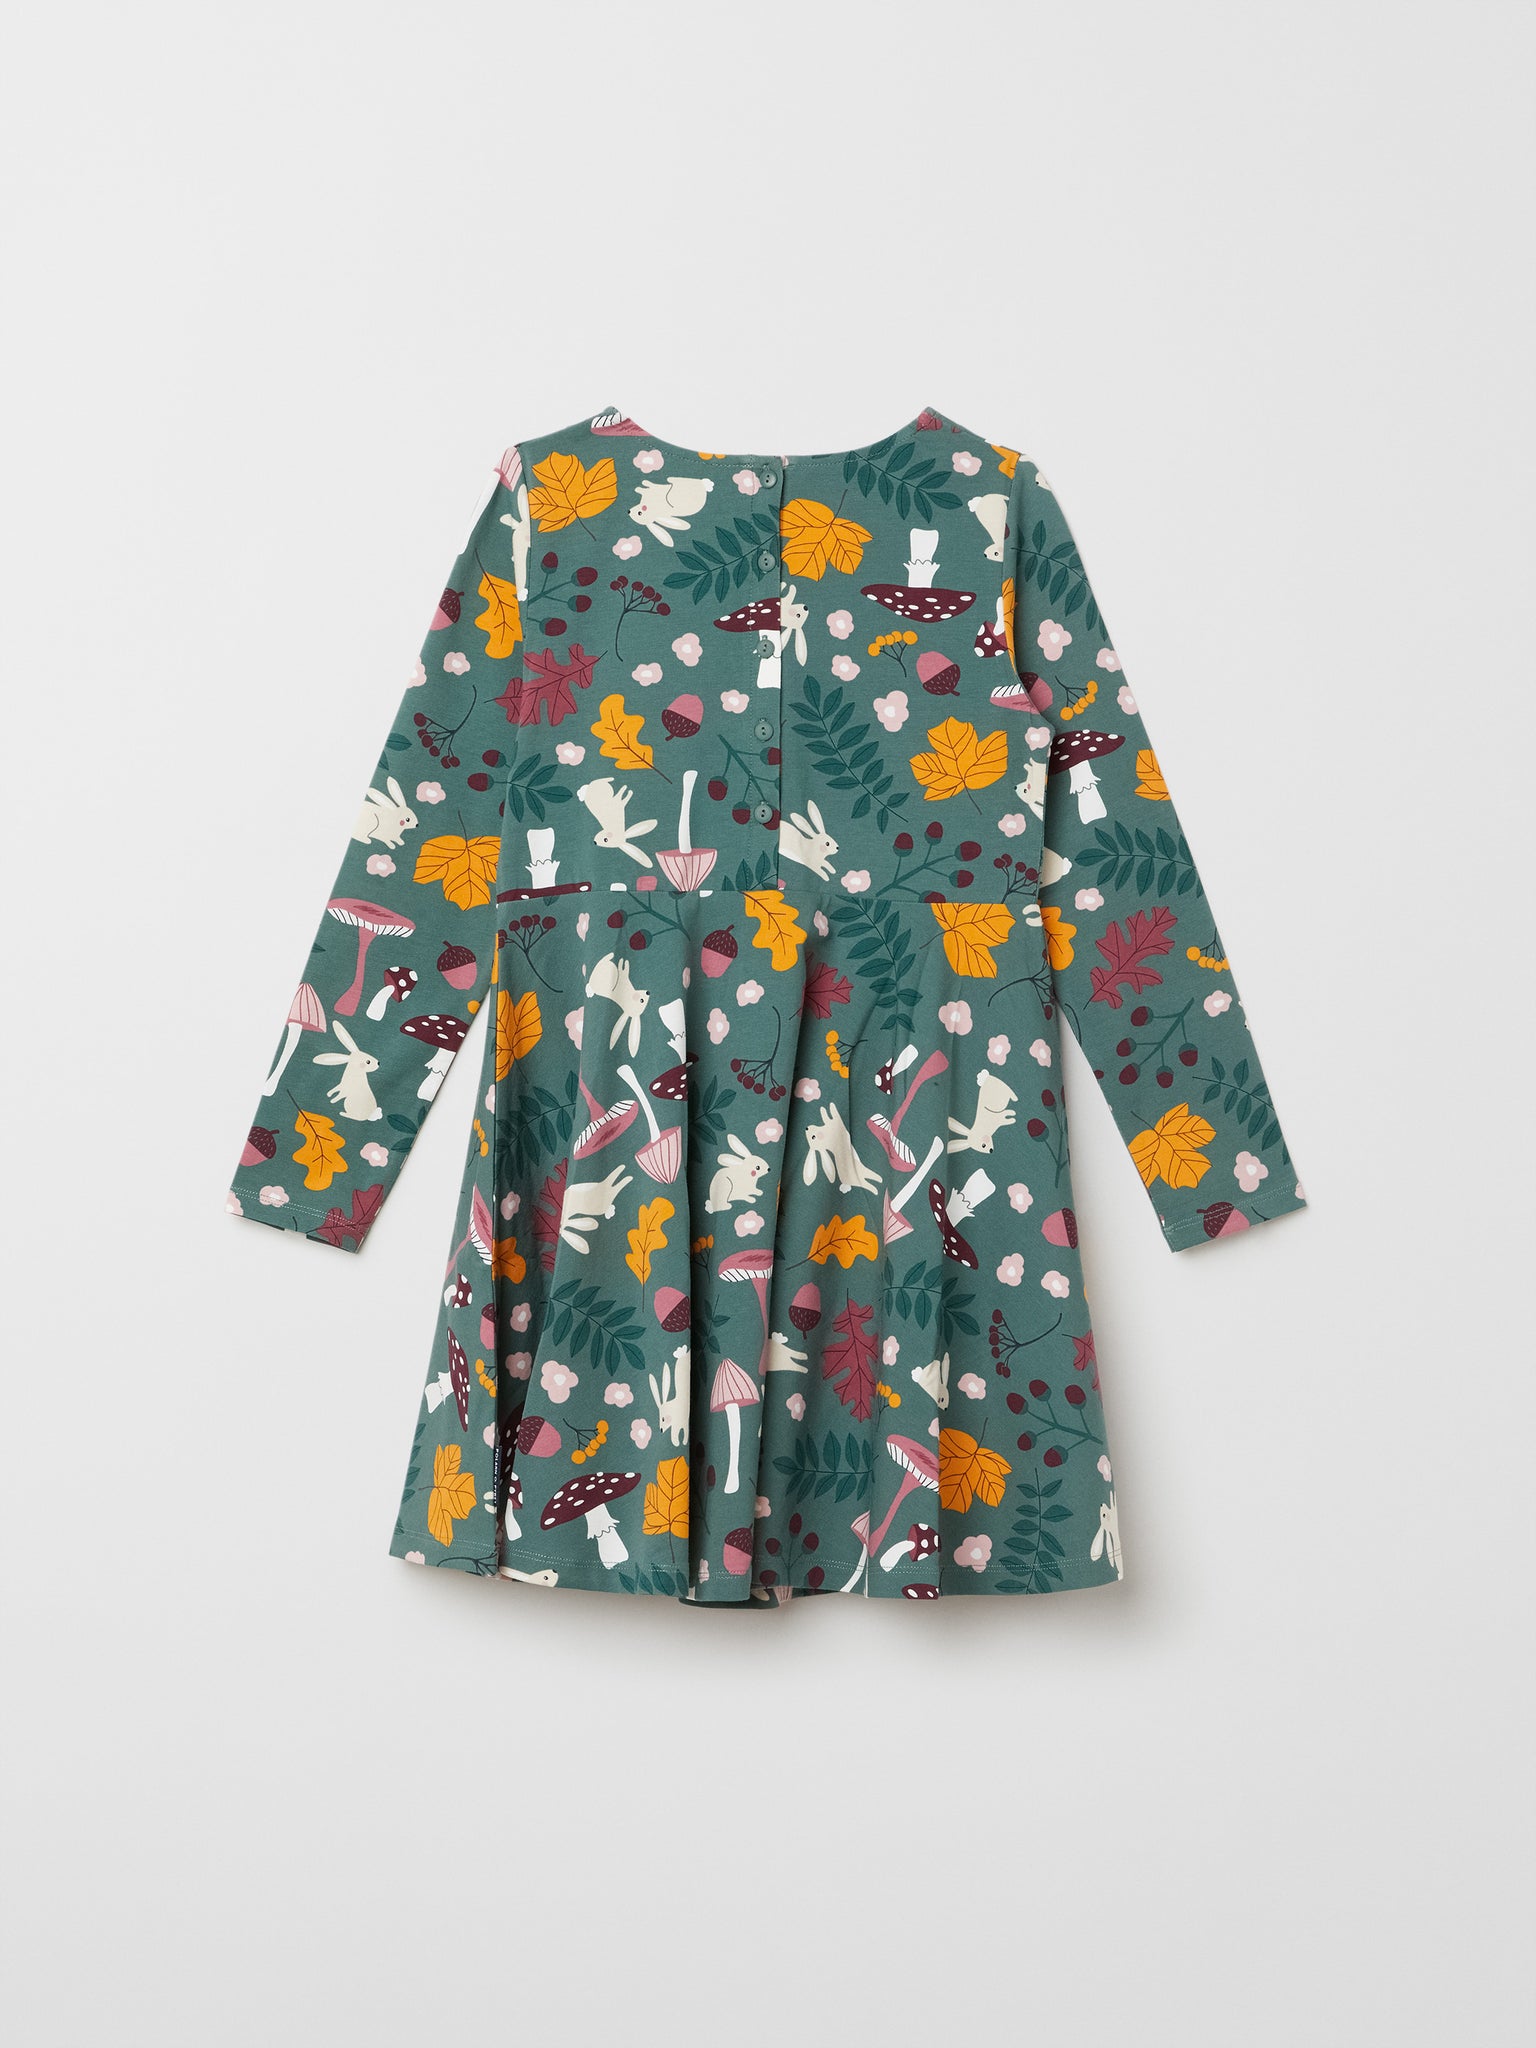 Organic Cotton Green Kids Dress from the Polarn O. Pyret kids collection. The best ethical kids clothes